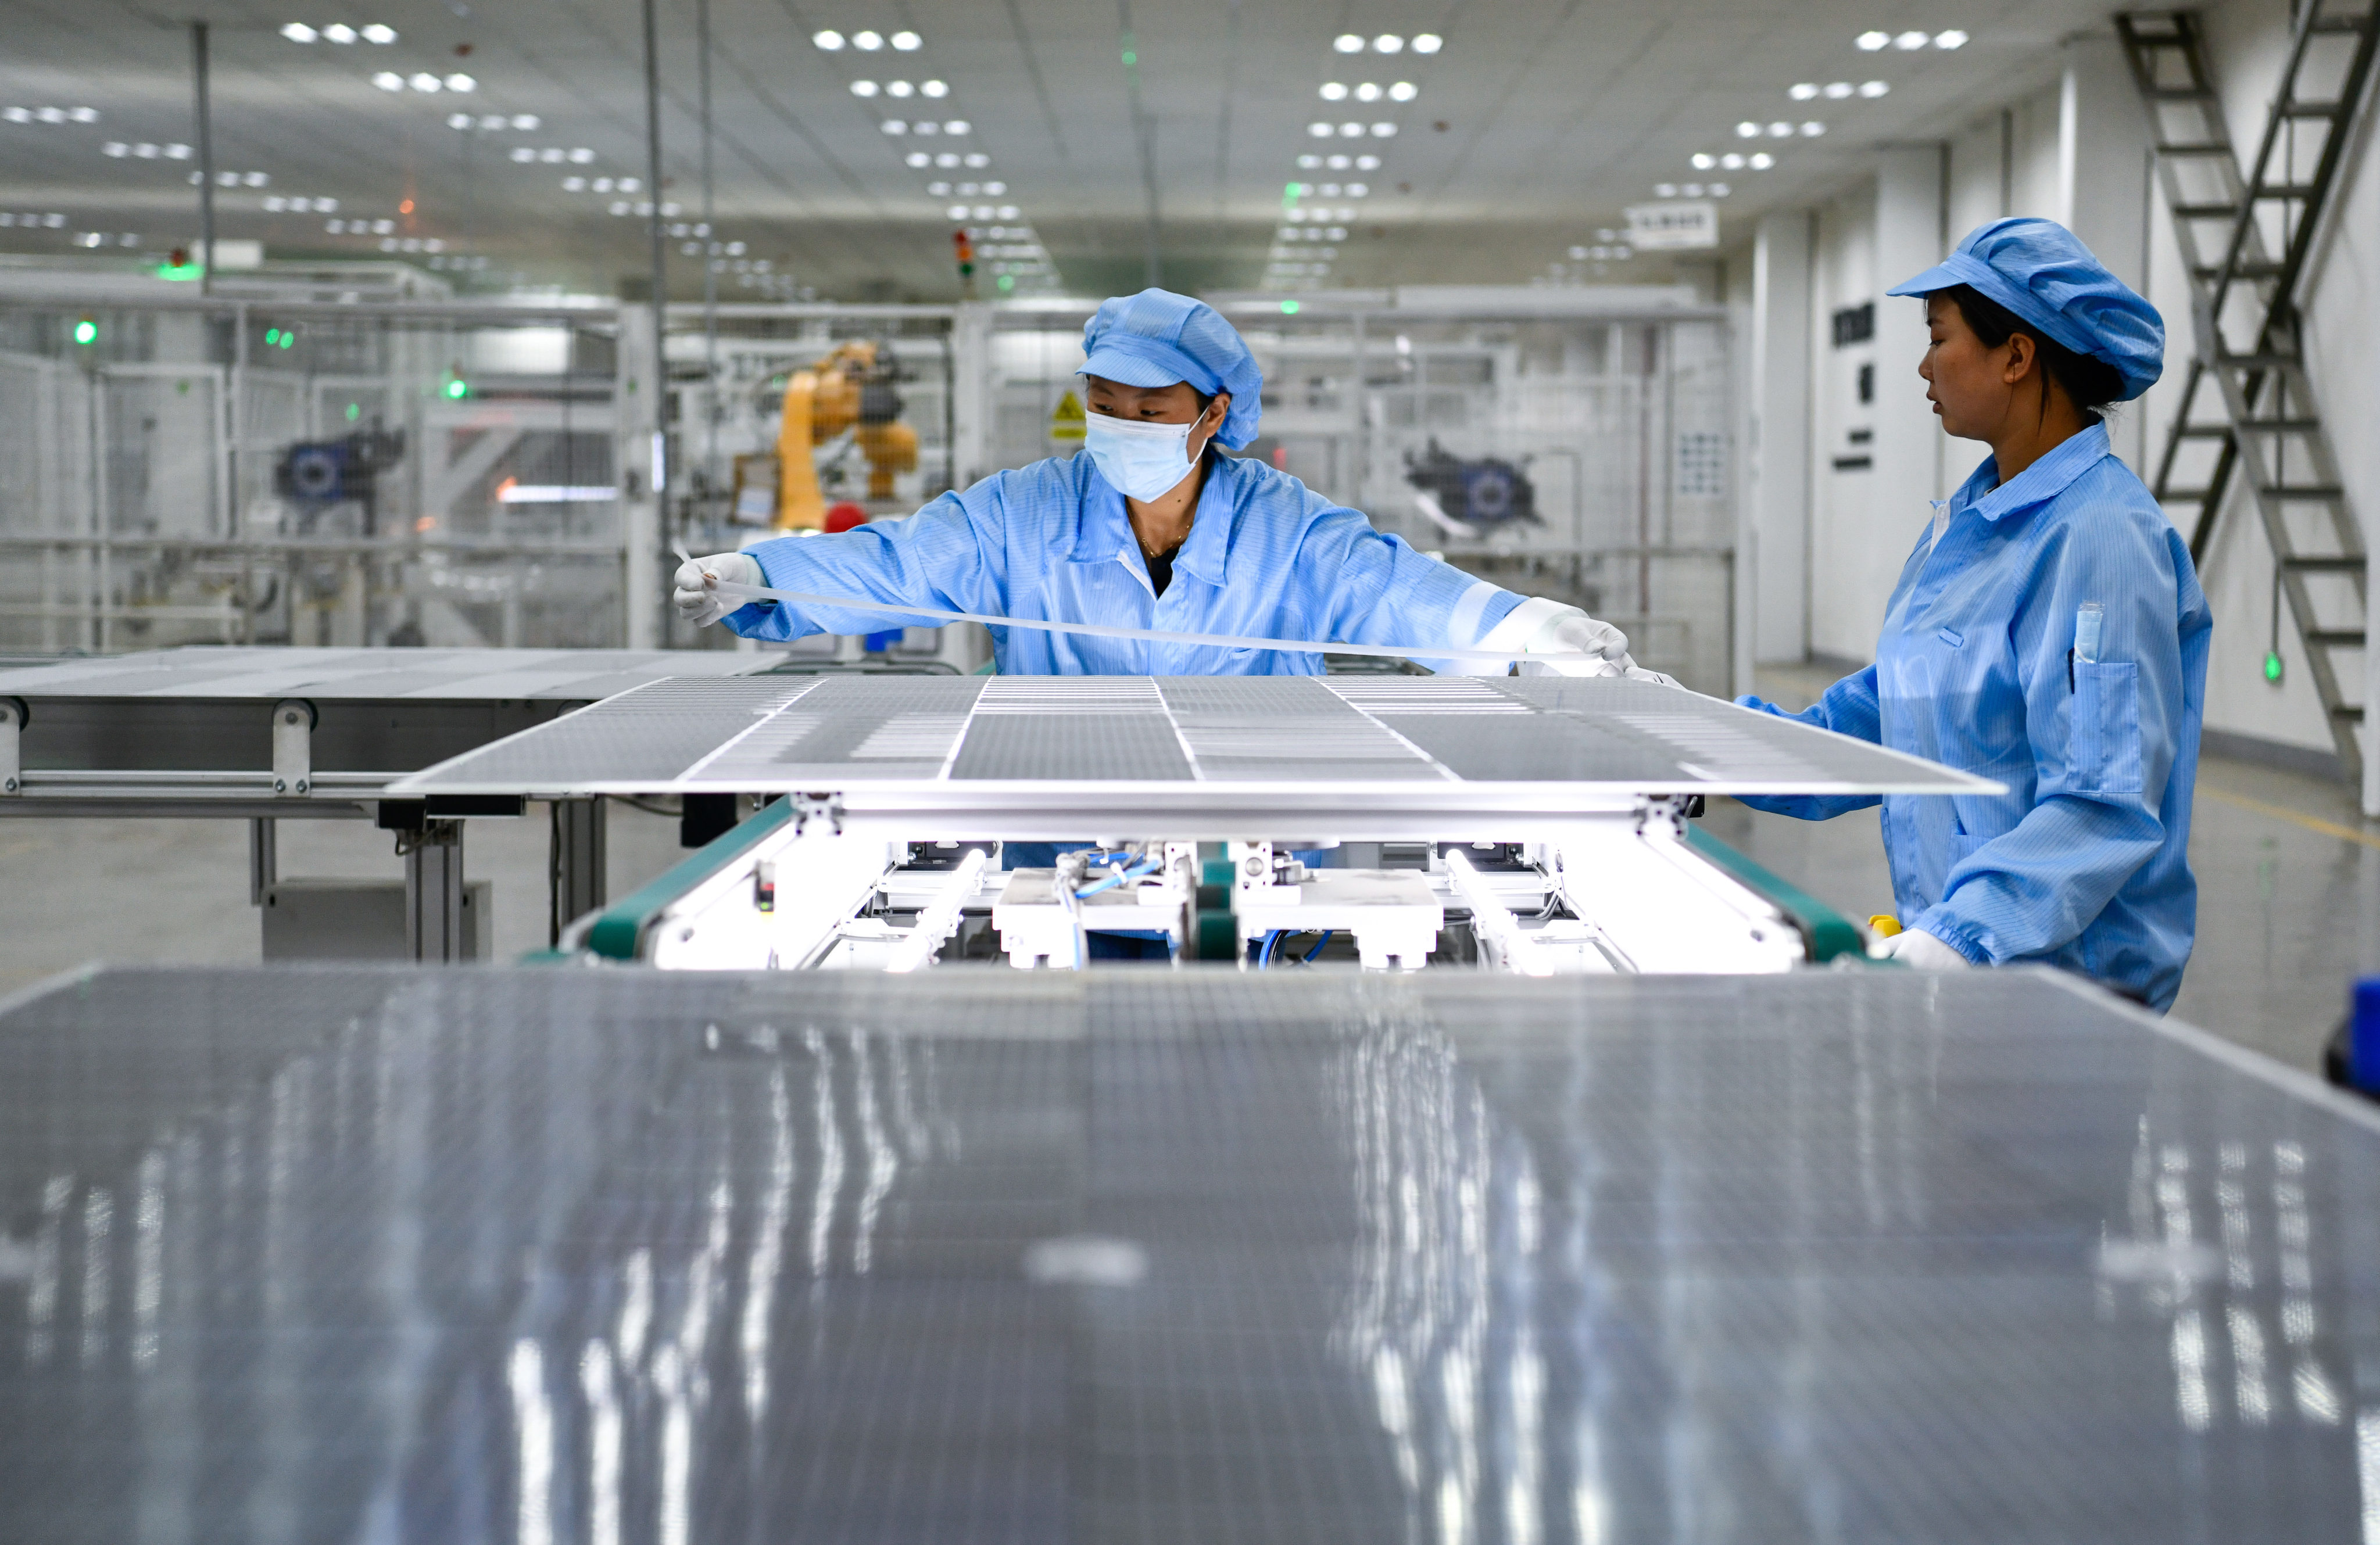 Workers produce photovoltaic modules at a company in southwest Guizhou province. China is seen dominating the green energy supply chain for the foreseeable future, according to analysts. Photo: Xinhua